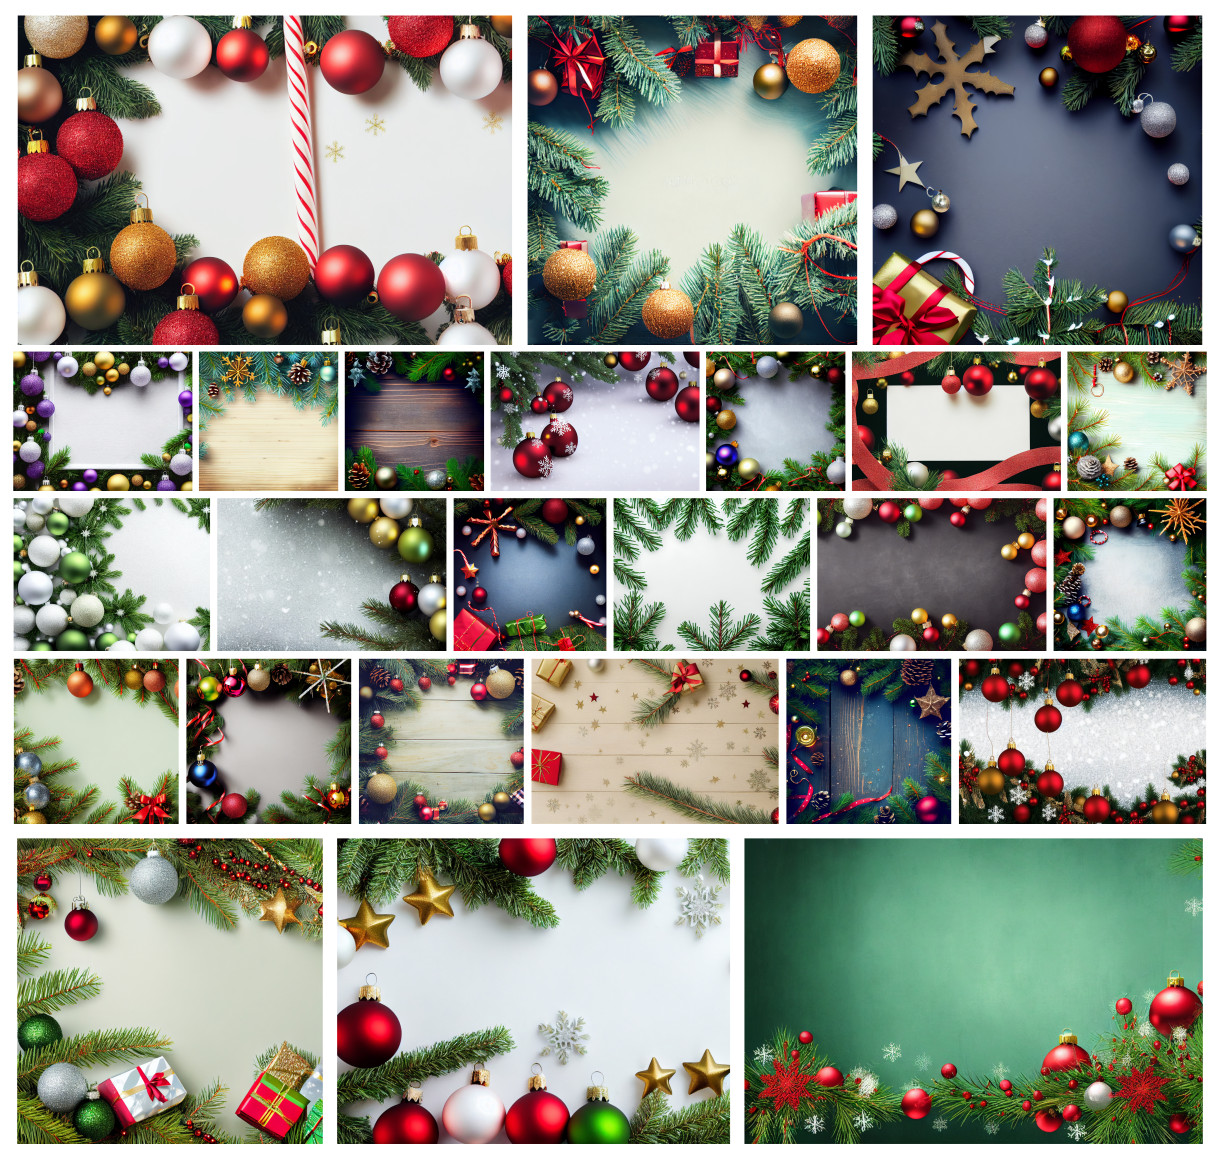 25 Festive Christmas Frame Backgrounds: Create Stunning Holiday Cards and Designs